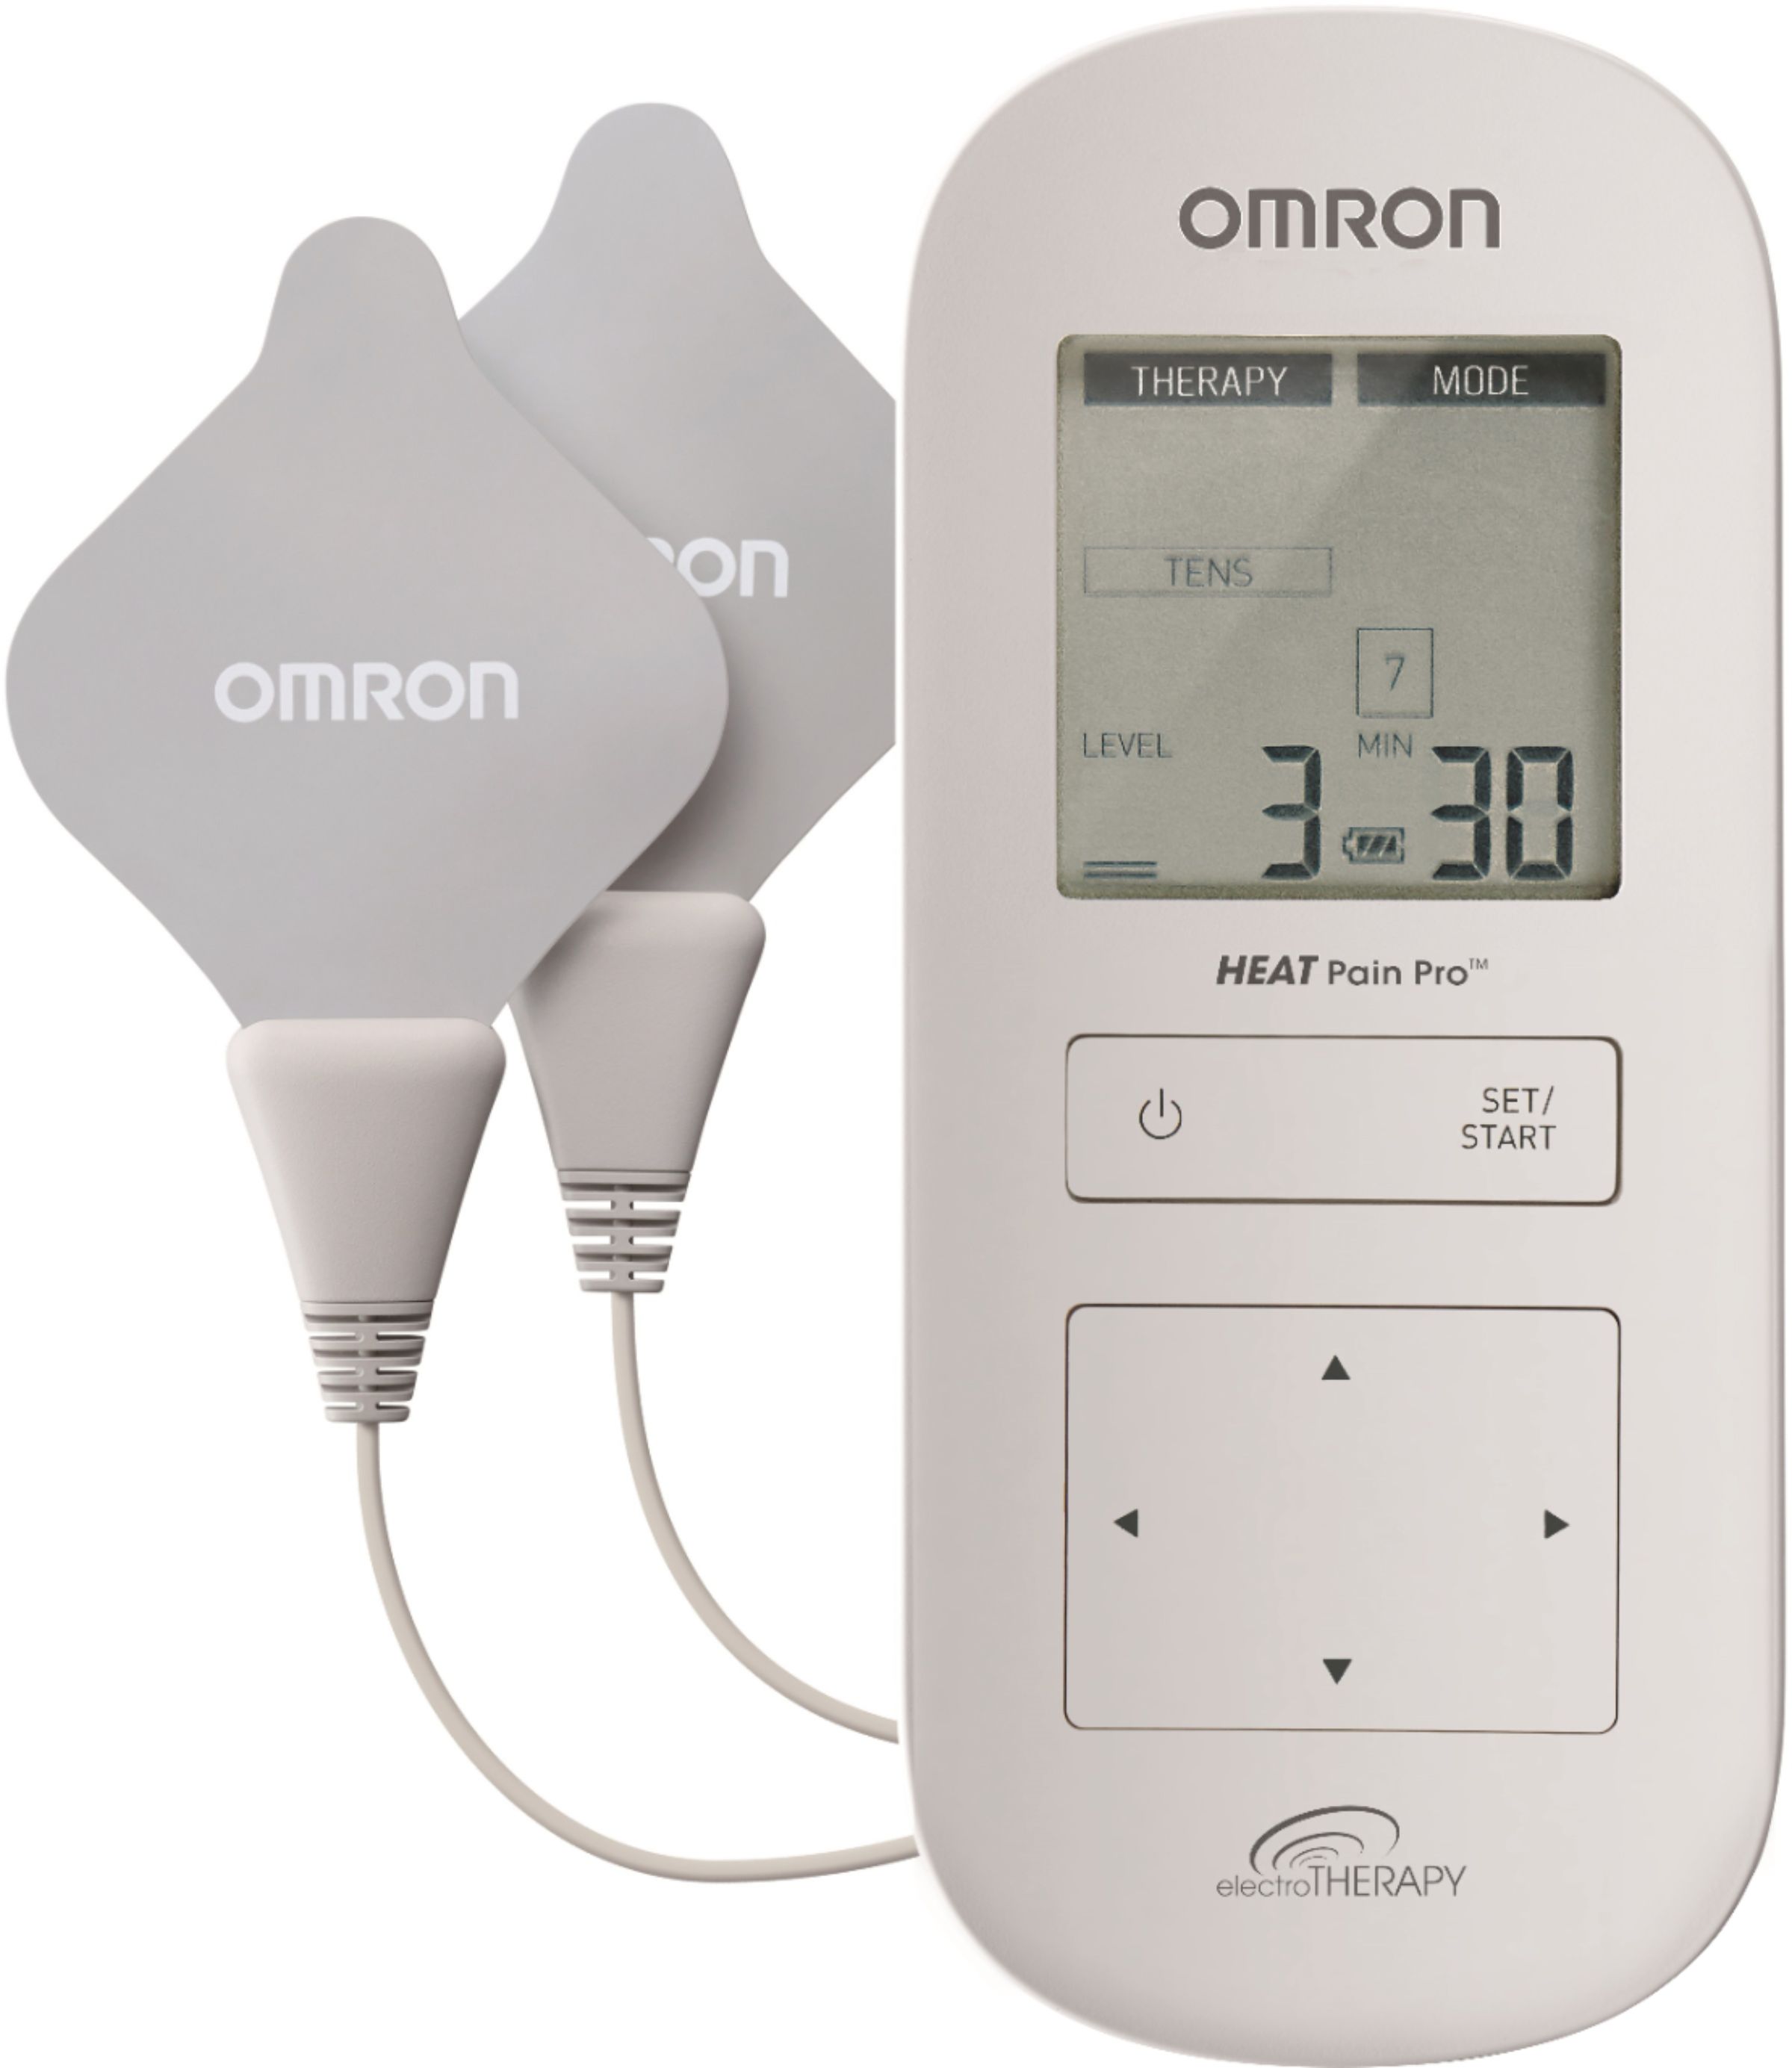 Best Buy: Omron ElectroTHERAPY Max Power Relief TENS Unit Black